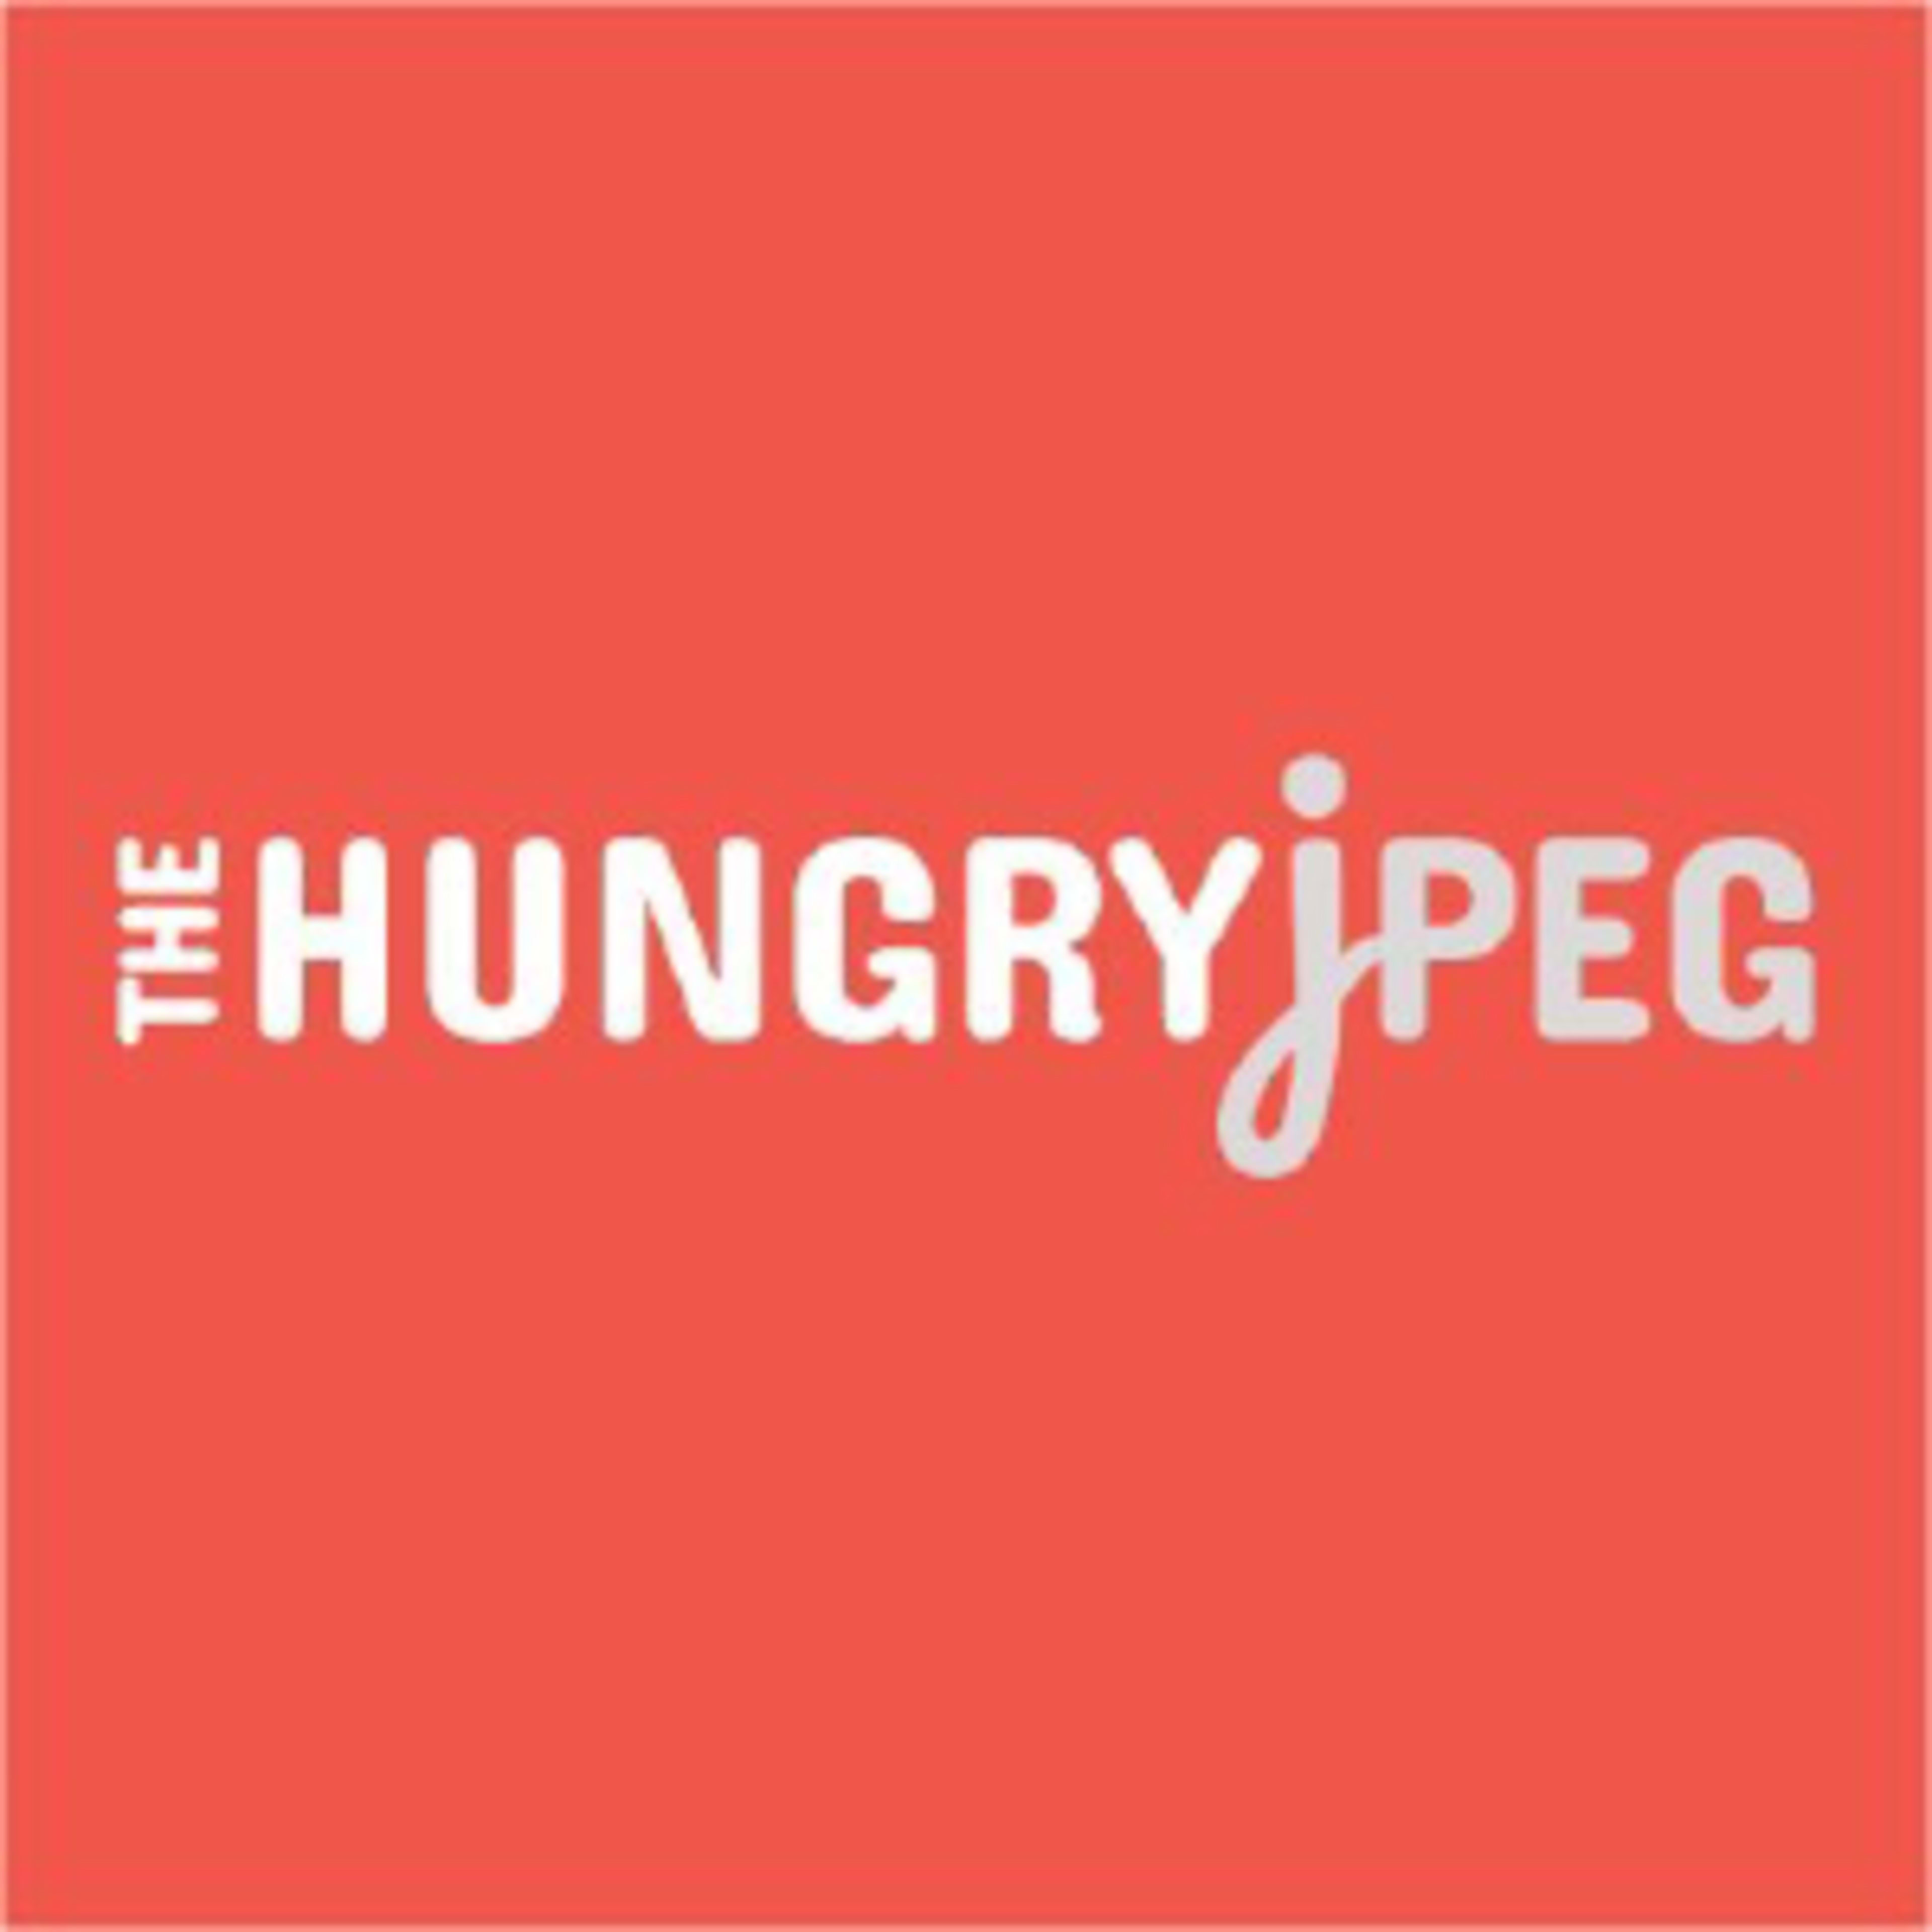 The Hungry JPEGCode